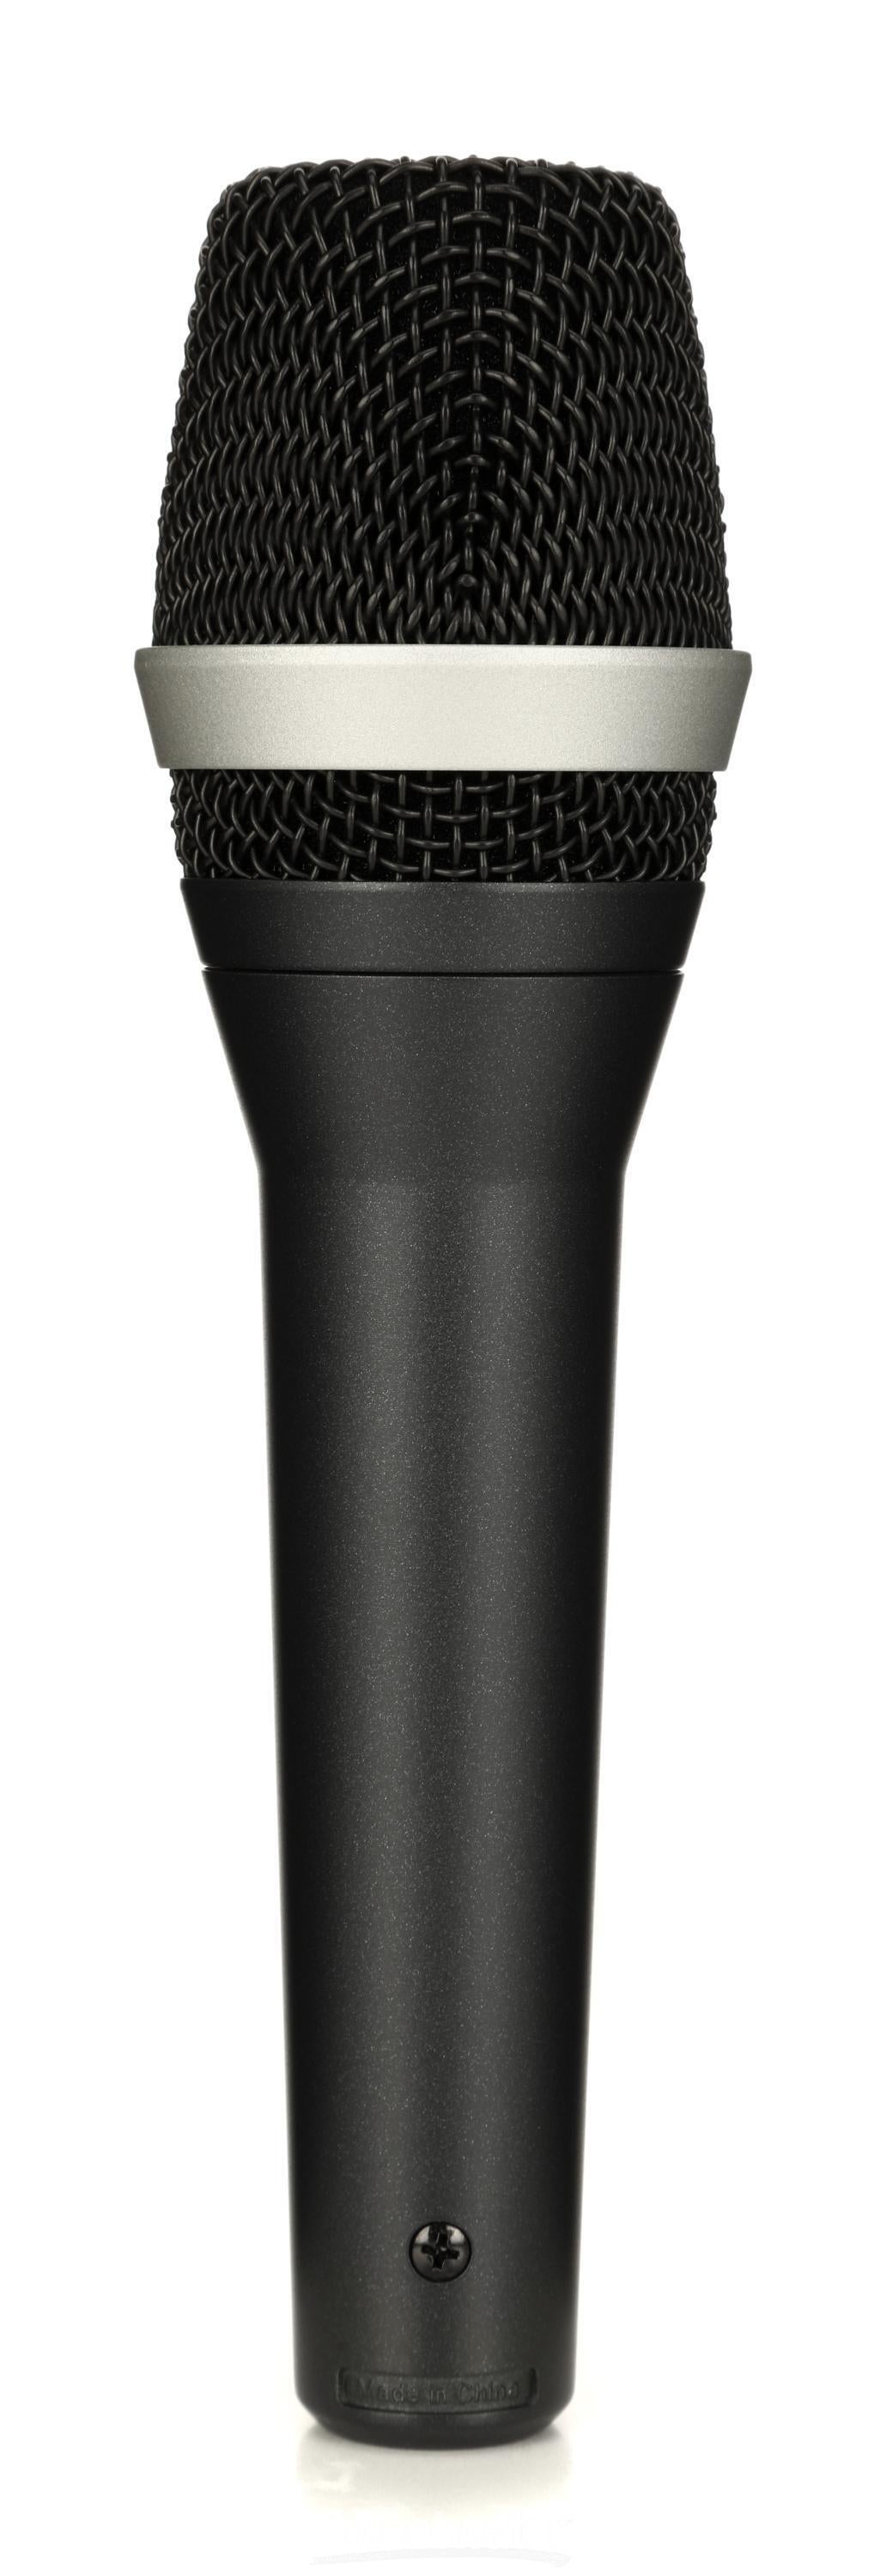 AKG D5 Supercardioid Dynamic Handheld Vocal Microphone | Sweetwater